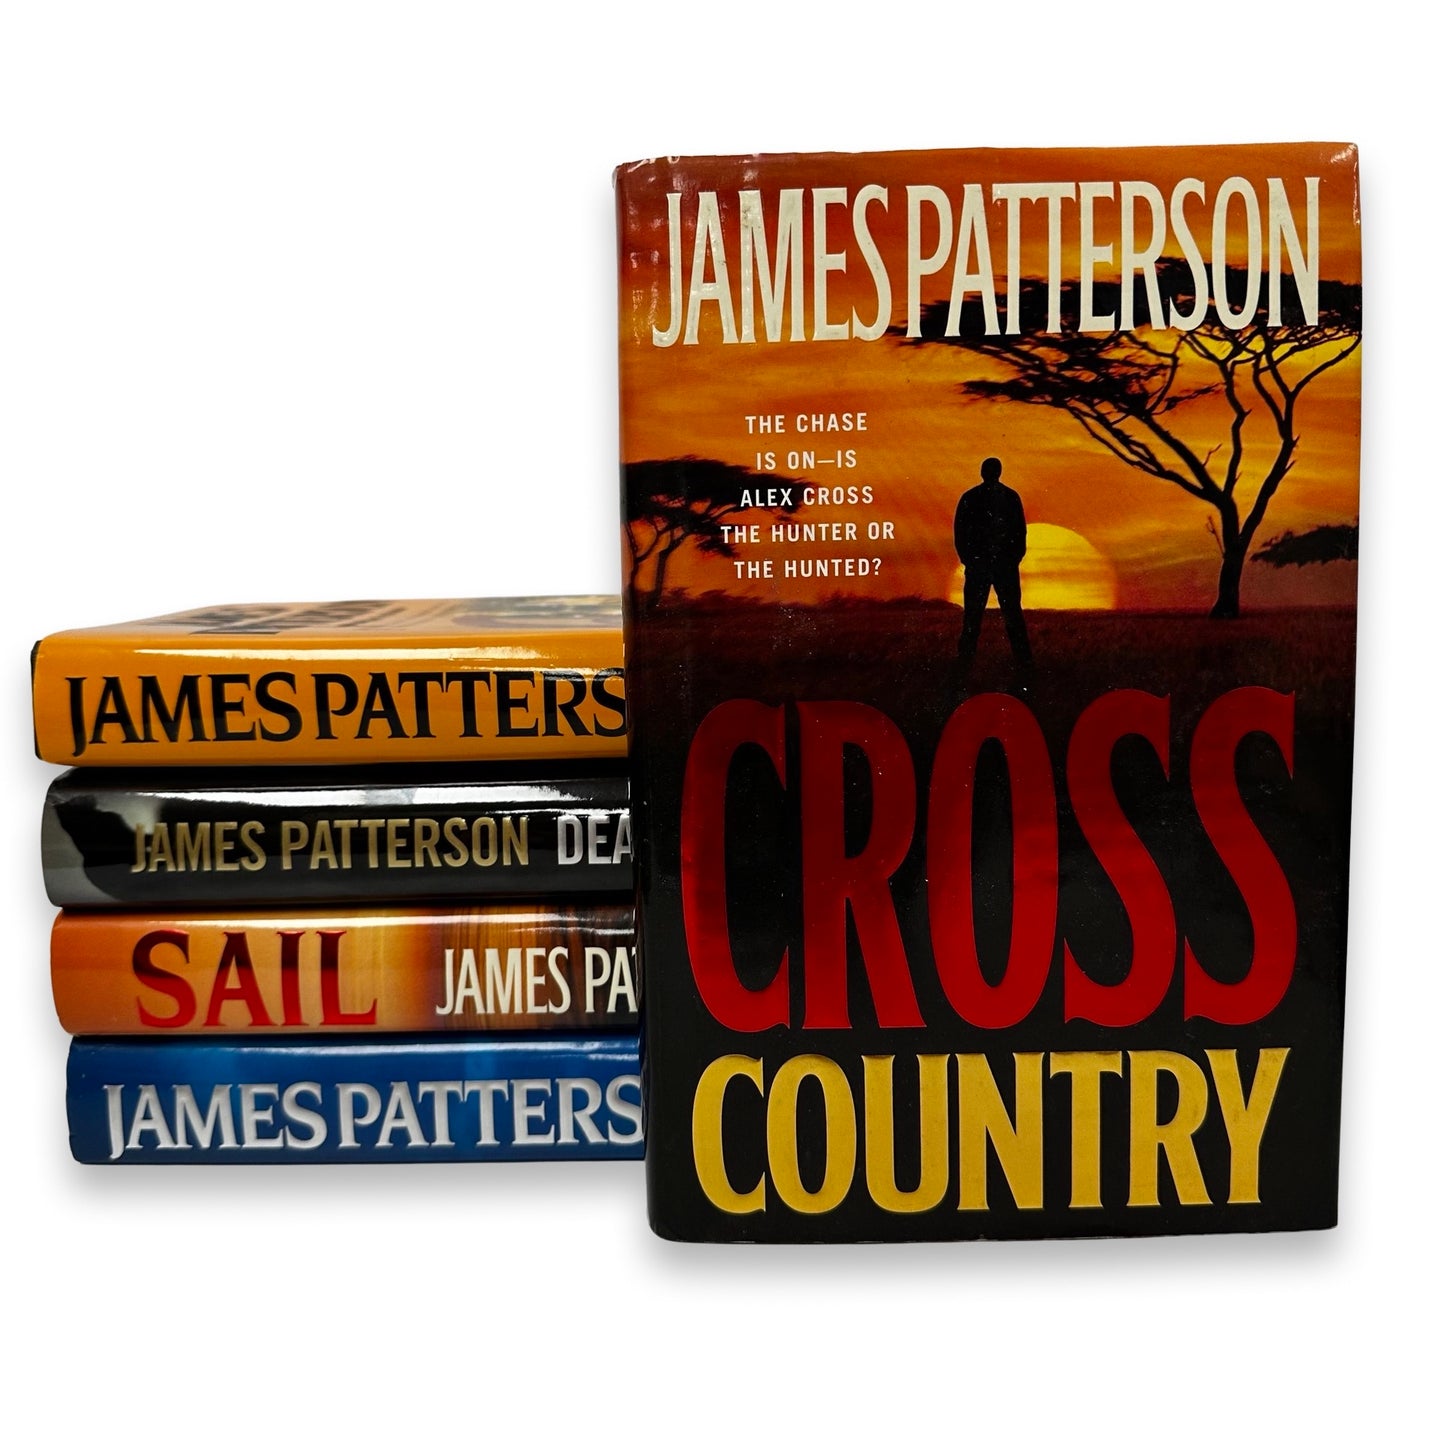 James Patterson books - Hardcovers